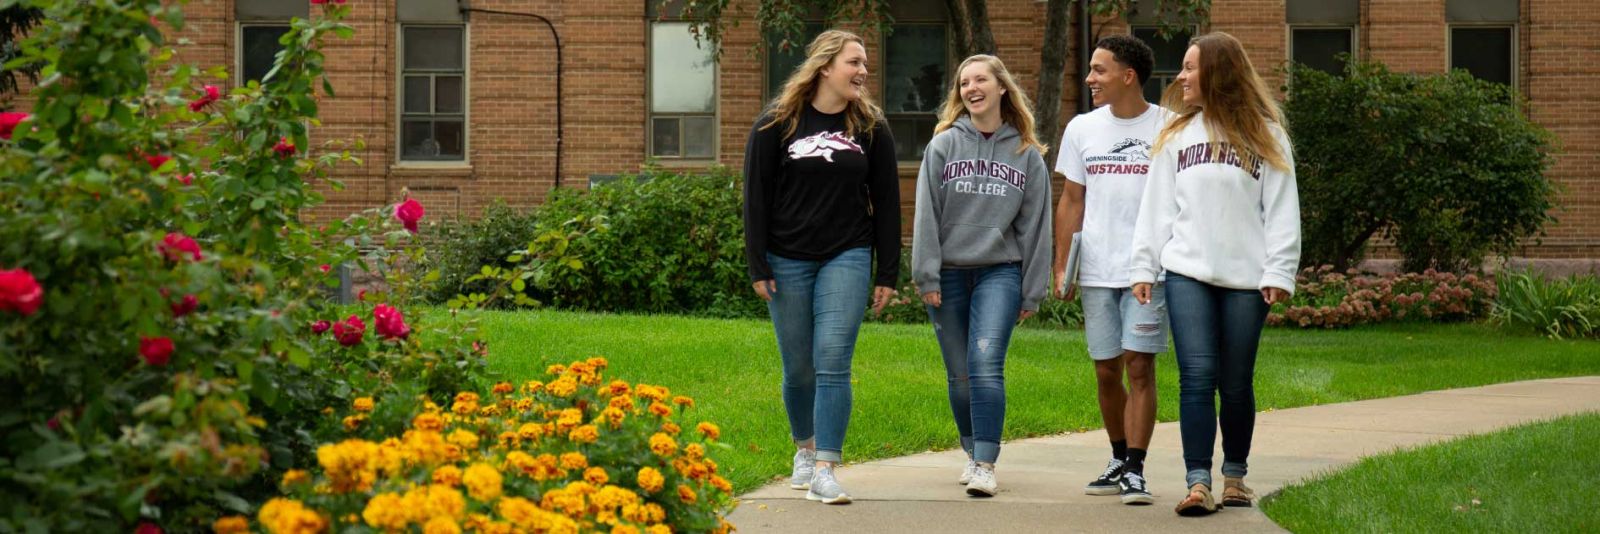 Students walking by Lewis Hall at Morningside College